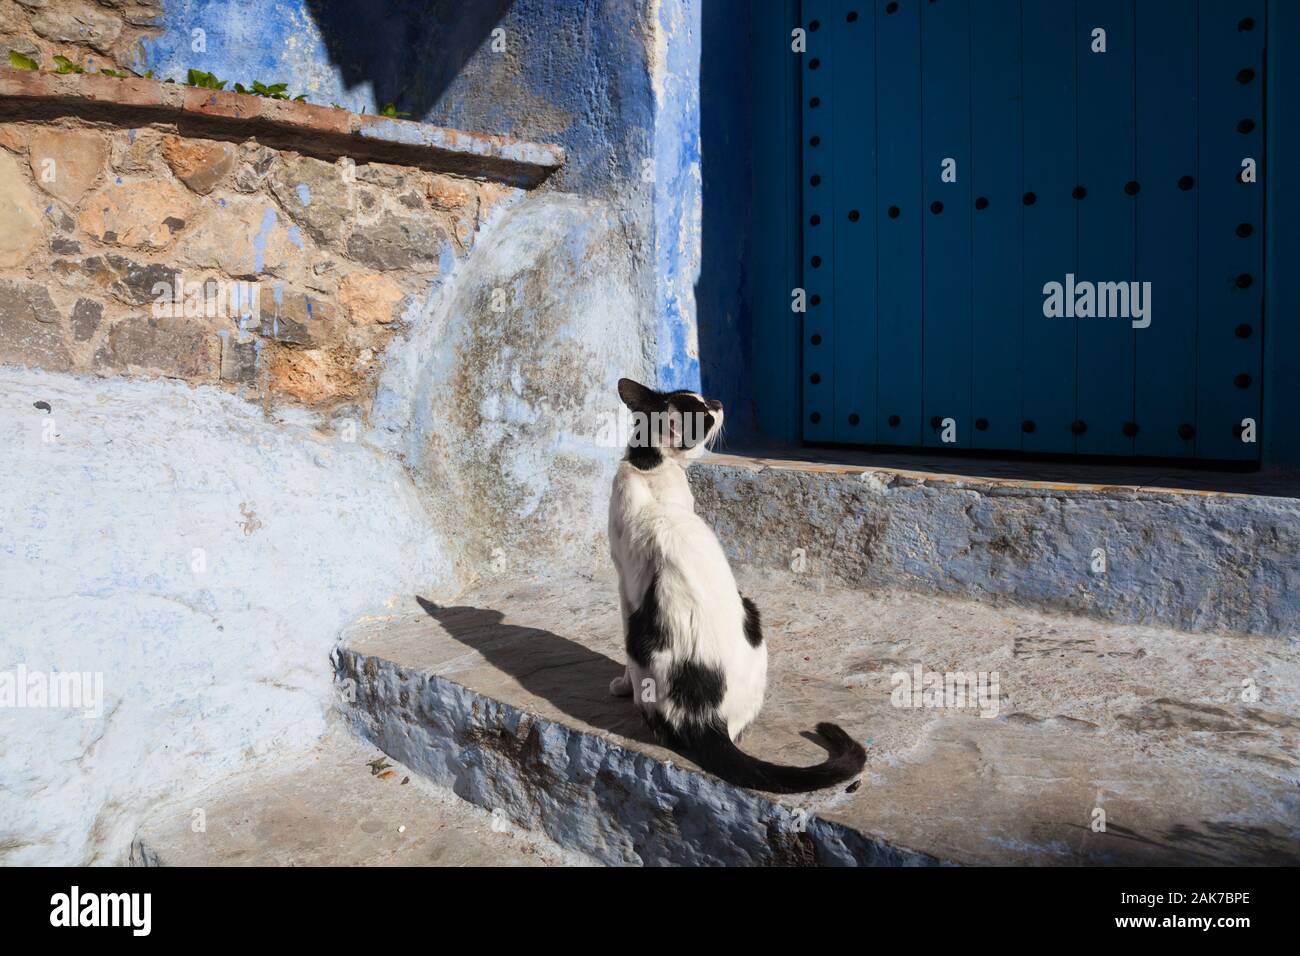 Black and white cat sitting on the doorstep in front of blue door in medina of Chefchaouen (also known as Chaouen), Morocco Stock Photo